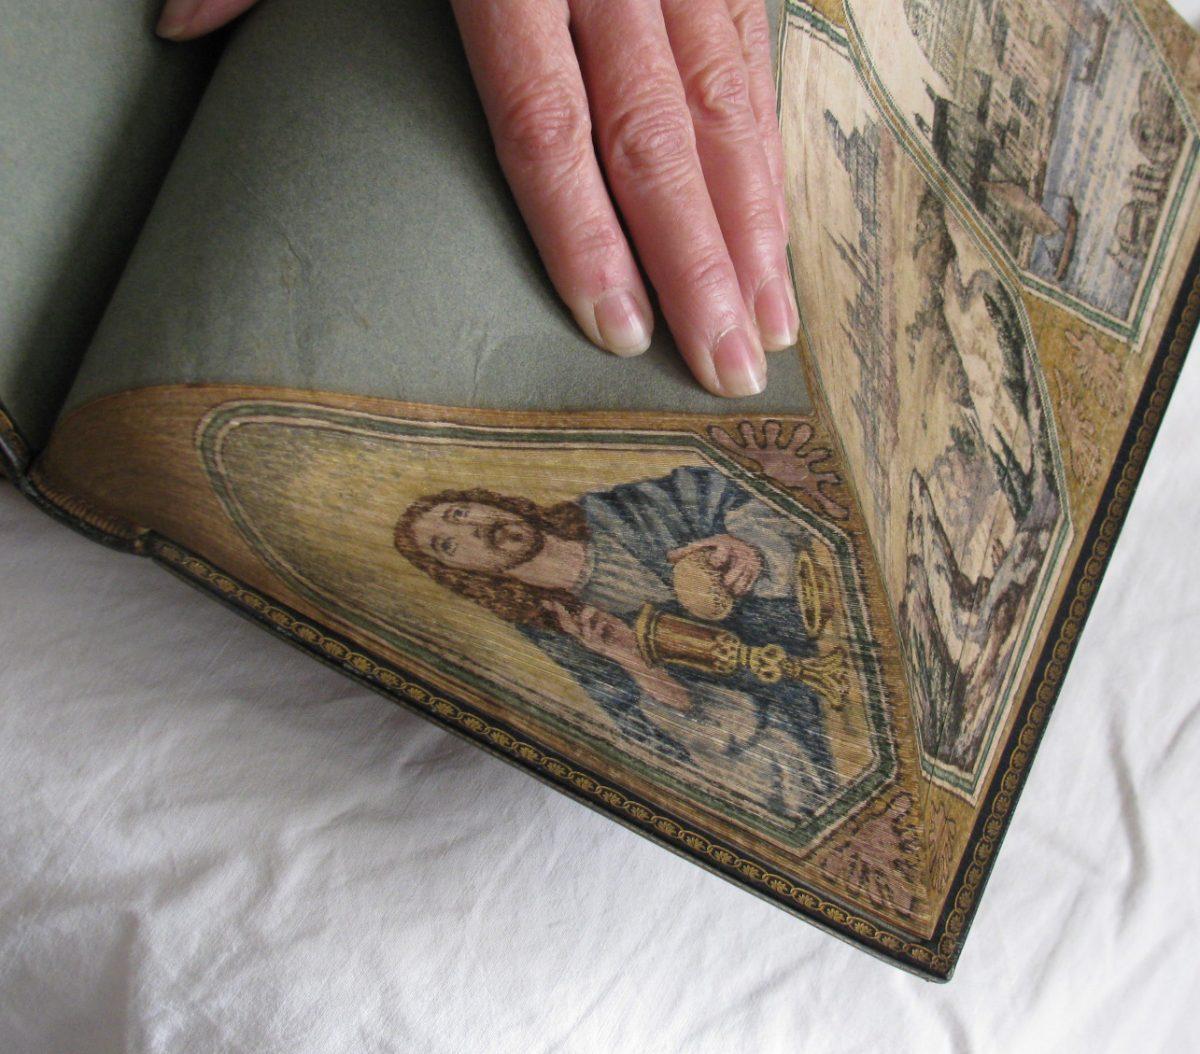 Fore-edge paintings on Bibles are a common commission for Martin Frost. (Foredgefrost)